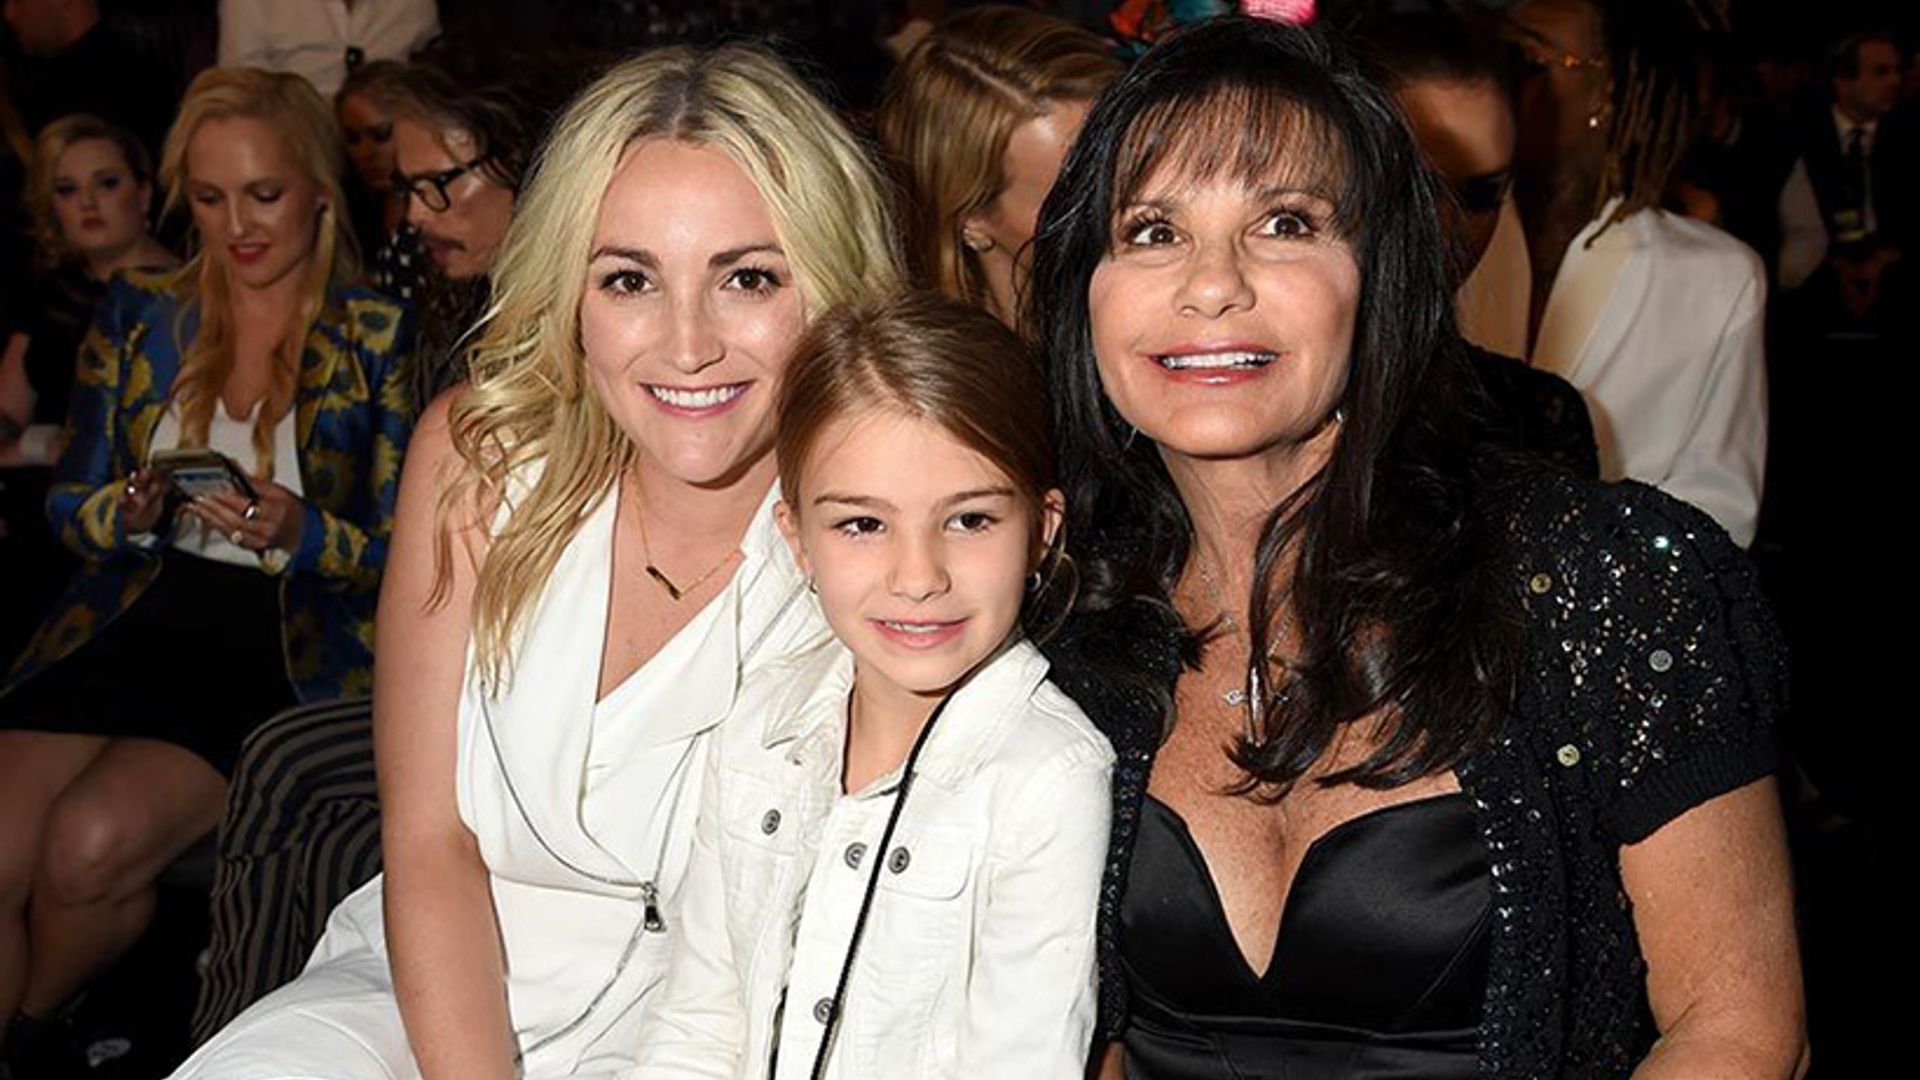 Jamie Lynn Spears celebrates daughter's birthday with first responders who saved her life